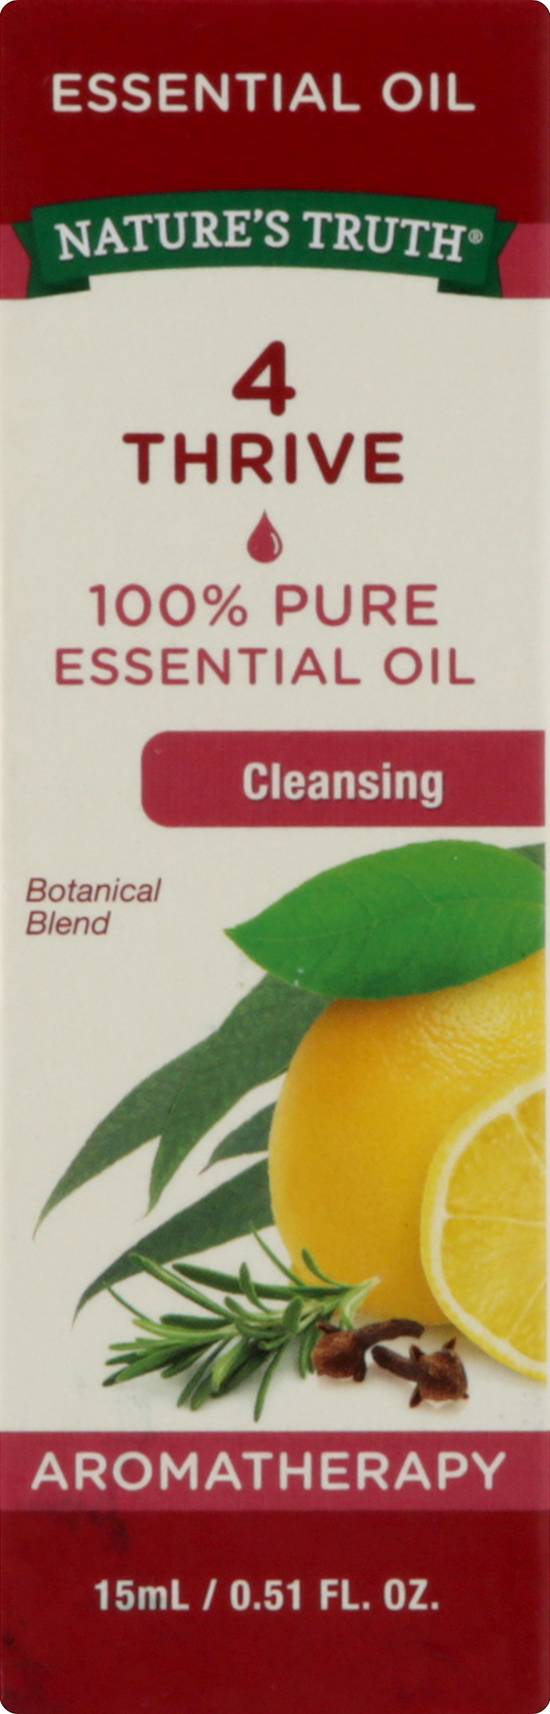 Nature's Truth Thrive Cleansing Essential Oil